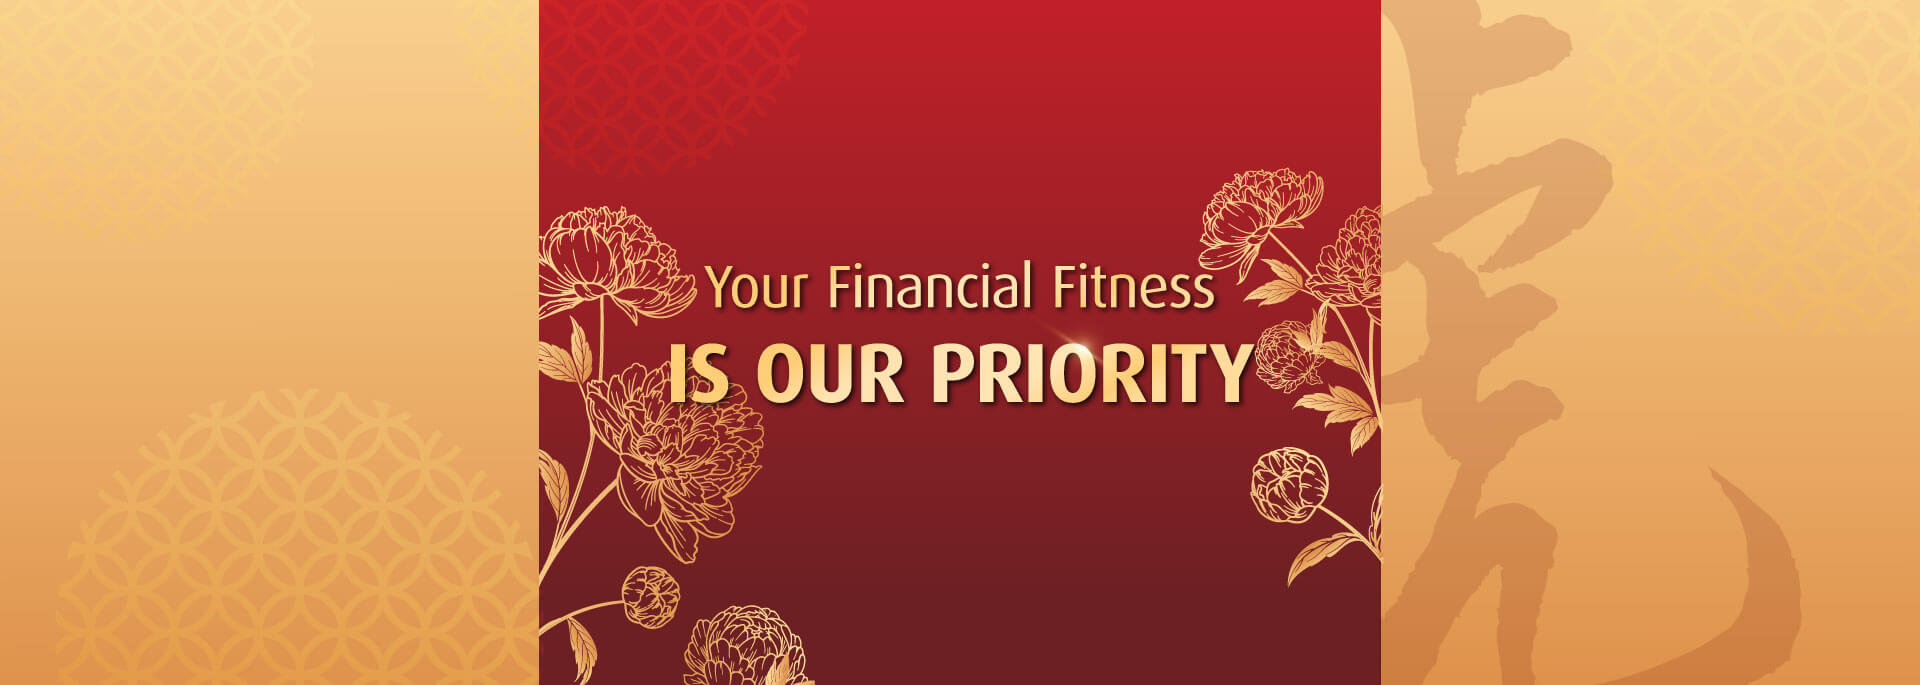 Your Financial Fitness IS OUR PRIORITY